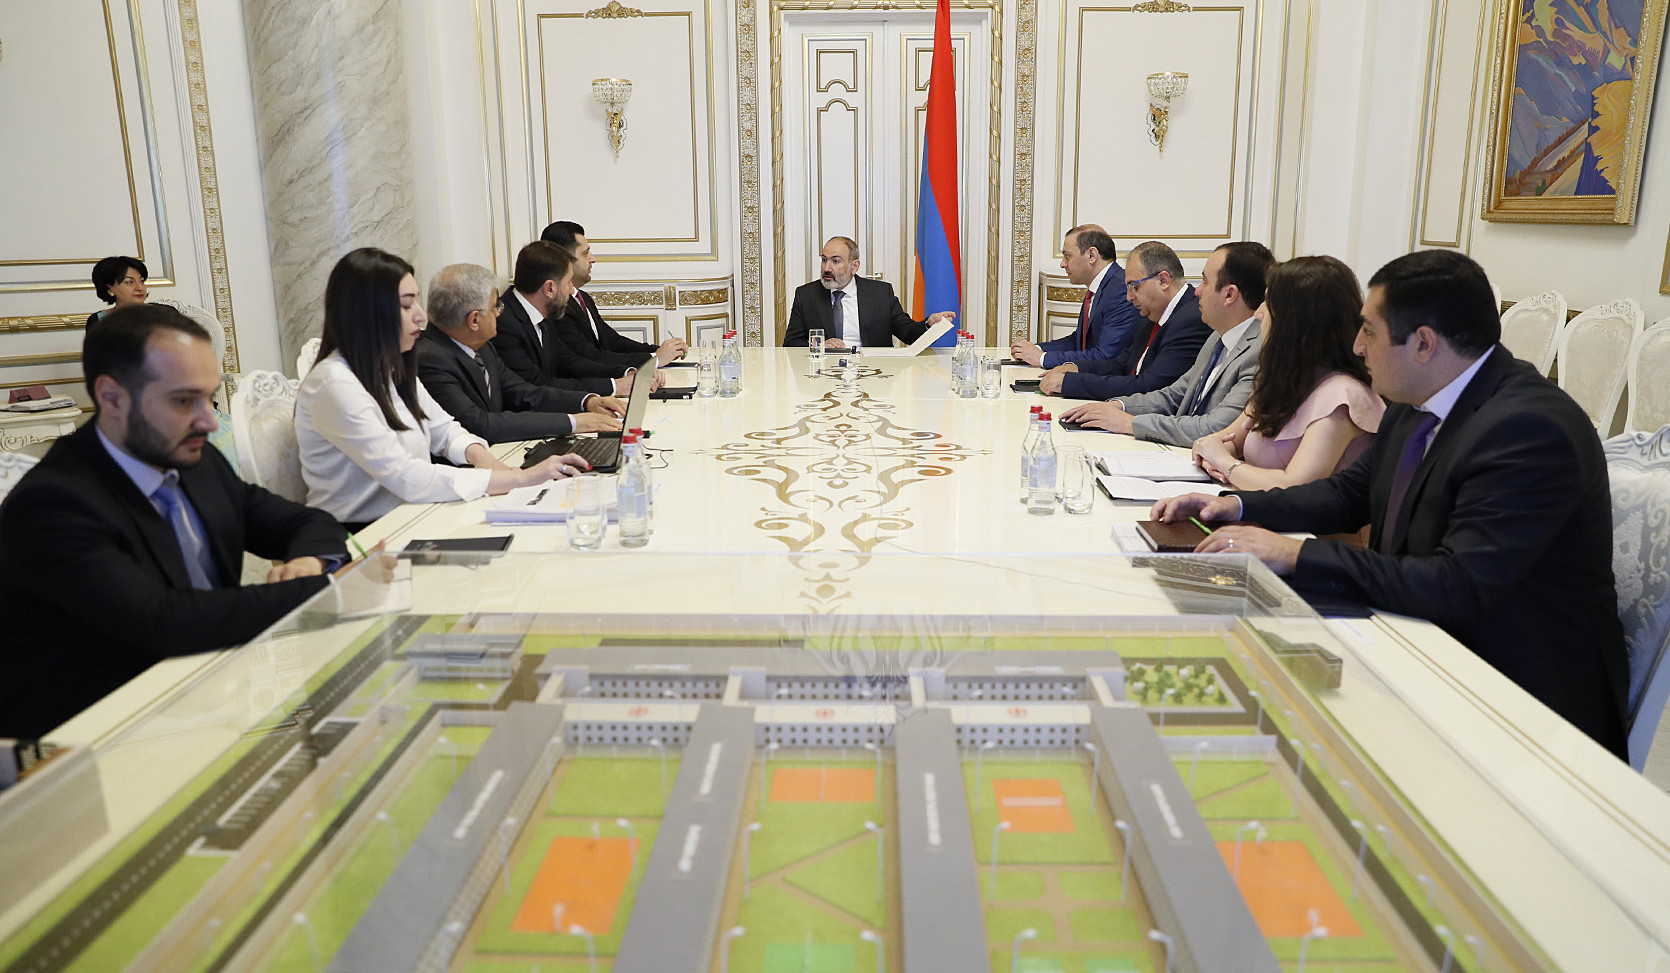 In the context of judicial-legal reforms, the new model of the penitentiary institutions was discussed